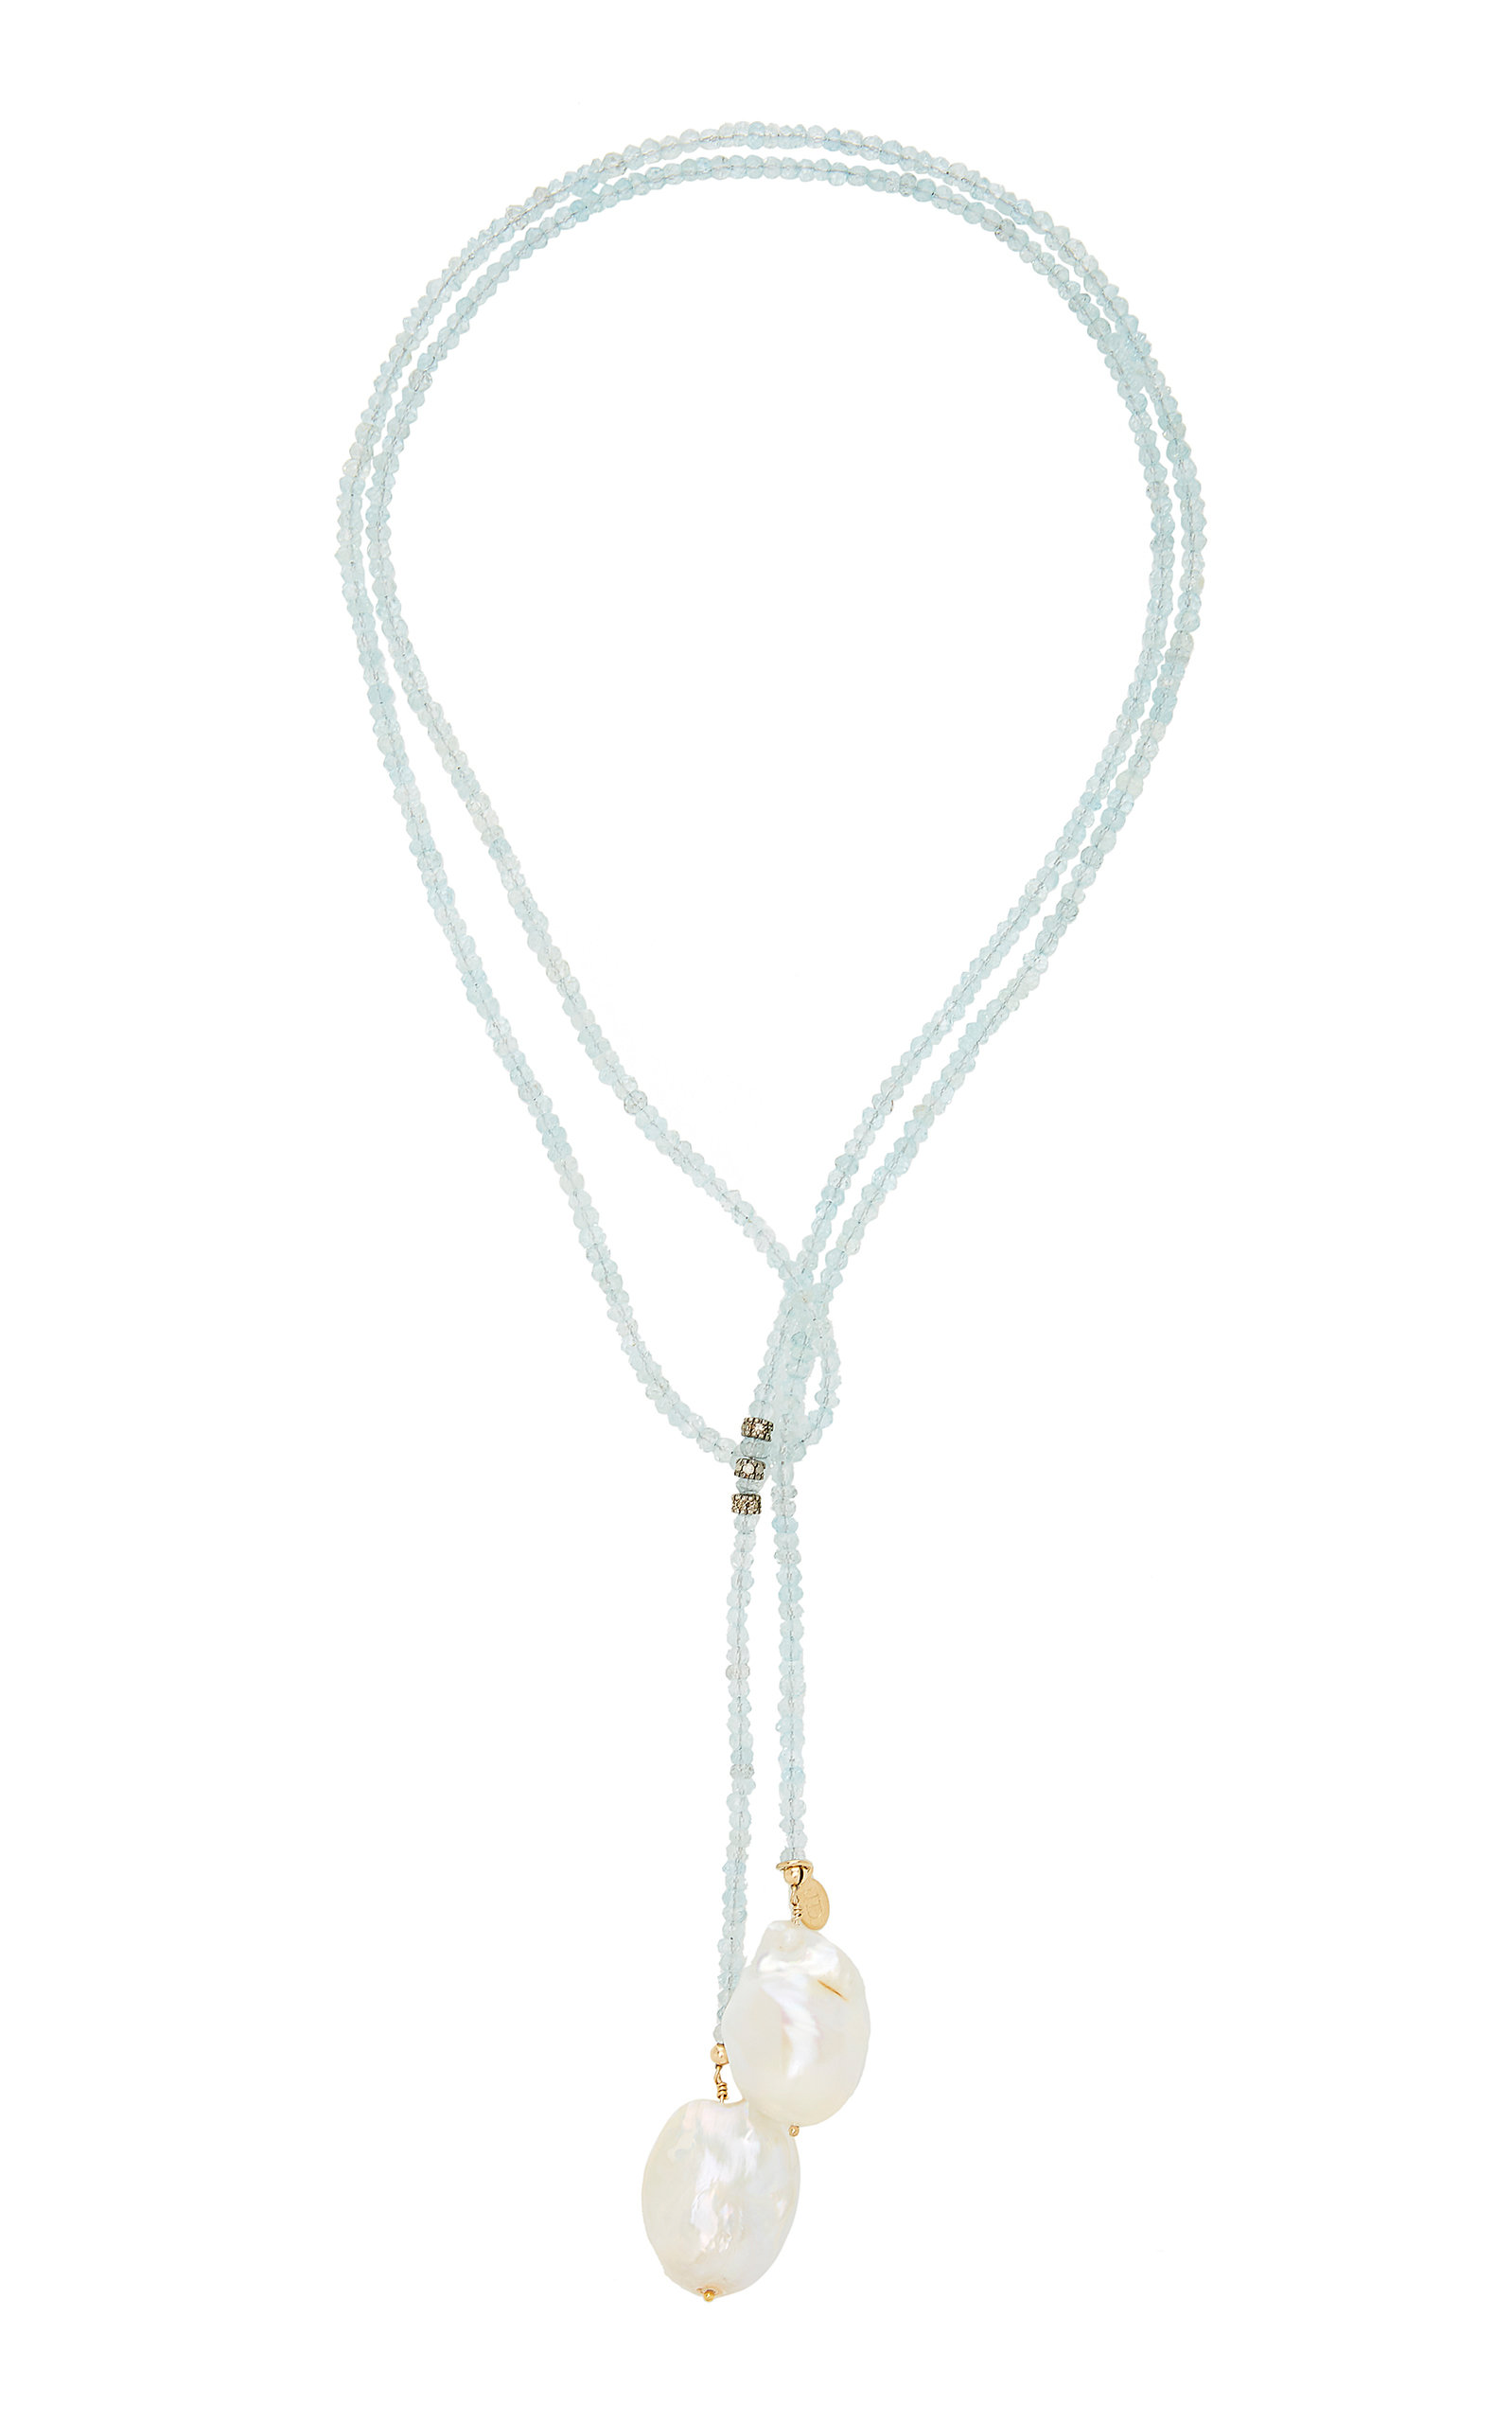 Gold-Filled; Aquamarine; Diamond and Pearl Necklace